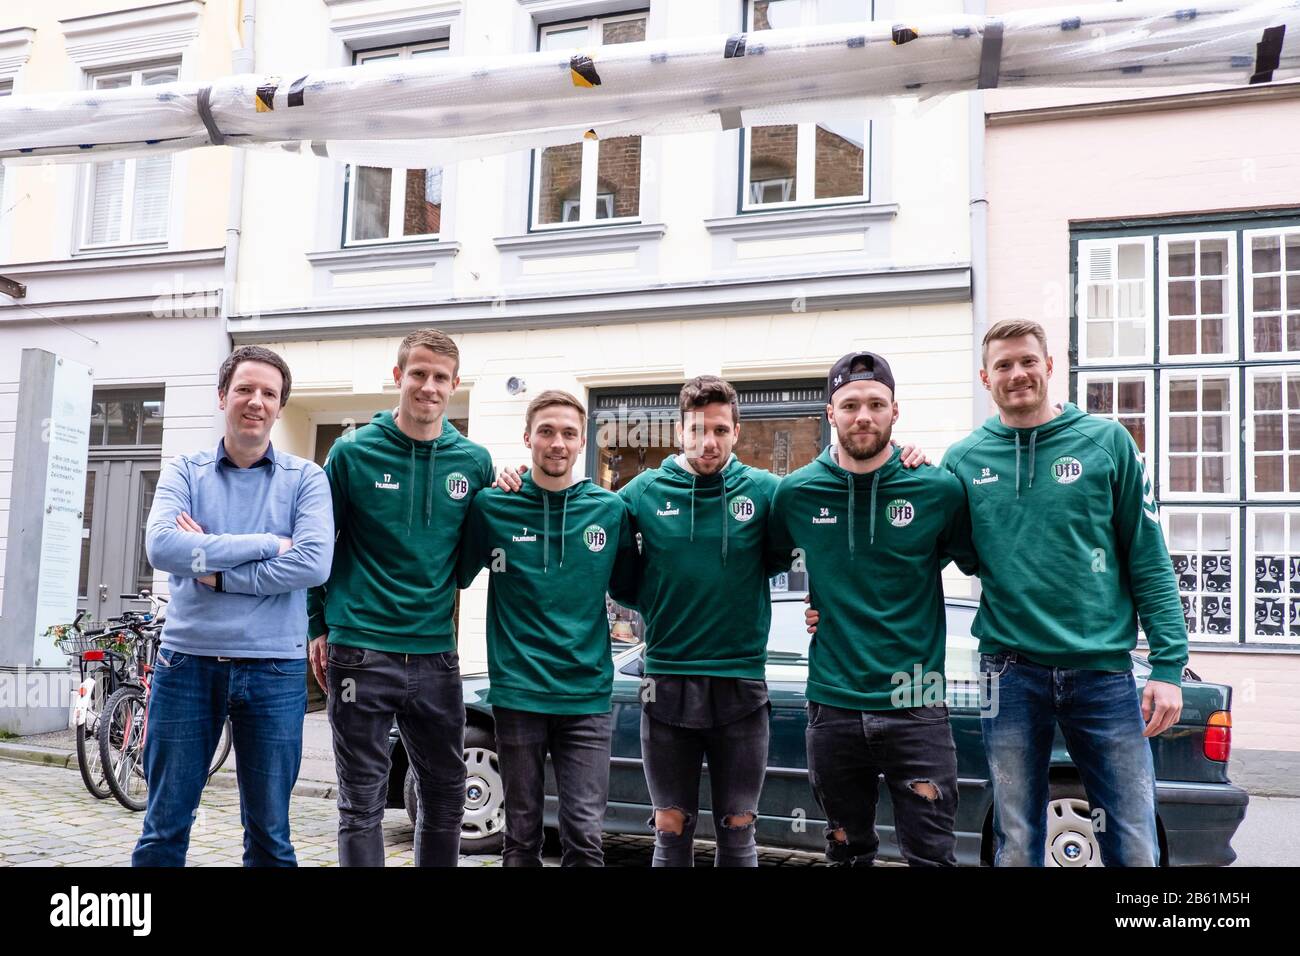 09 March 2020, Schleswig-Holstein, Lübeck: Jörg-Philip Thomsa, manager of the Günter Grass House (l-r) and the footballers of VfB Lübeck, Tommy Grupe, Lukas Raeder, Morten Rüdiger, Ahmet Arslan, Patrick Hobsch and Lukas Raeder pose in front of the Günter Grass House with an original goal from the football World Cup semi-final match Germany vs. Brazil from 2014 (1:7). The goal will be on display along with other exhibits from March 16 in the exhibition 'Günter Grass: My Football Century'. Photo: Frank Molter/dpa Stock Photo